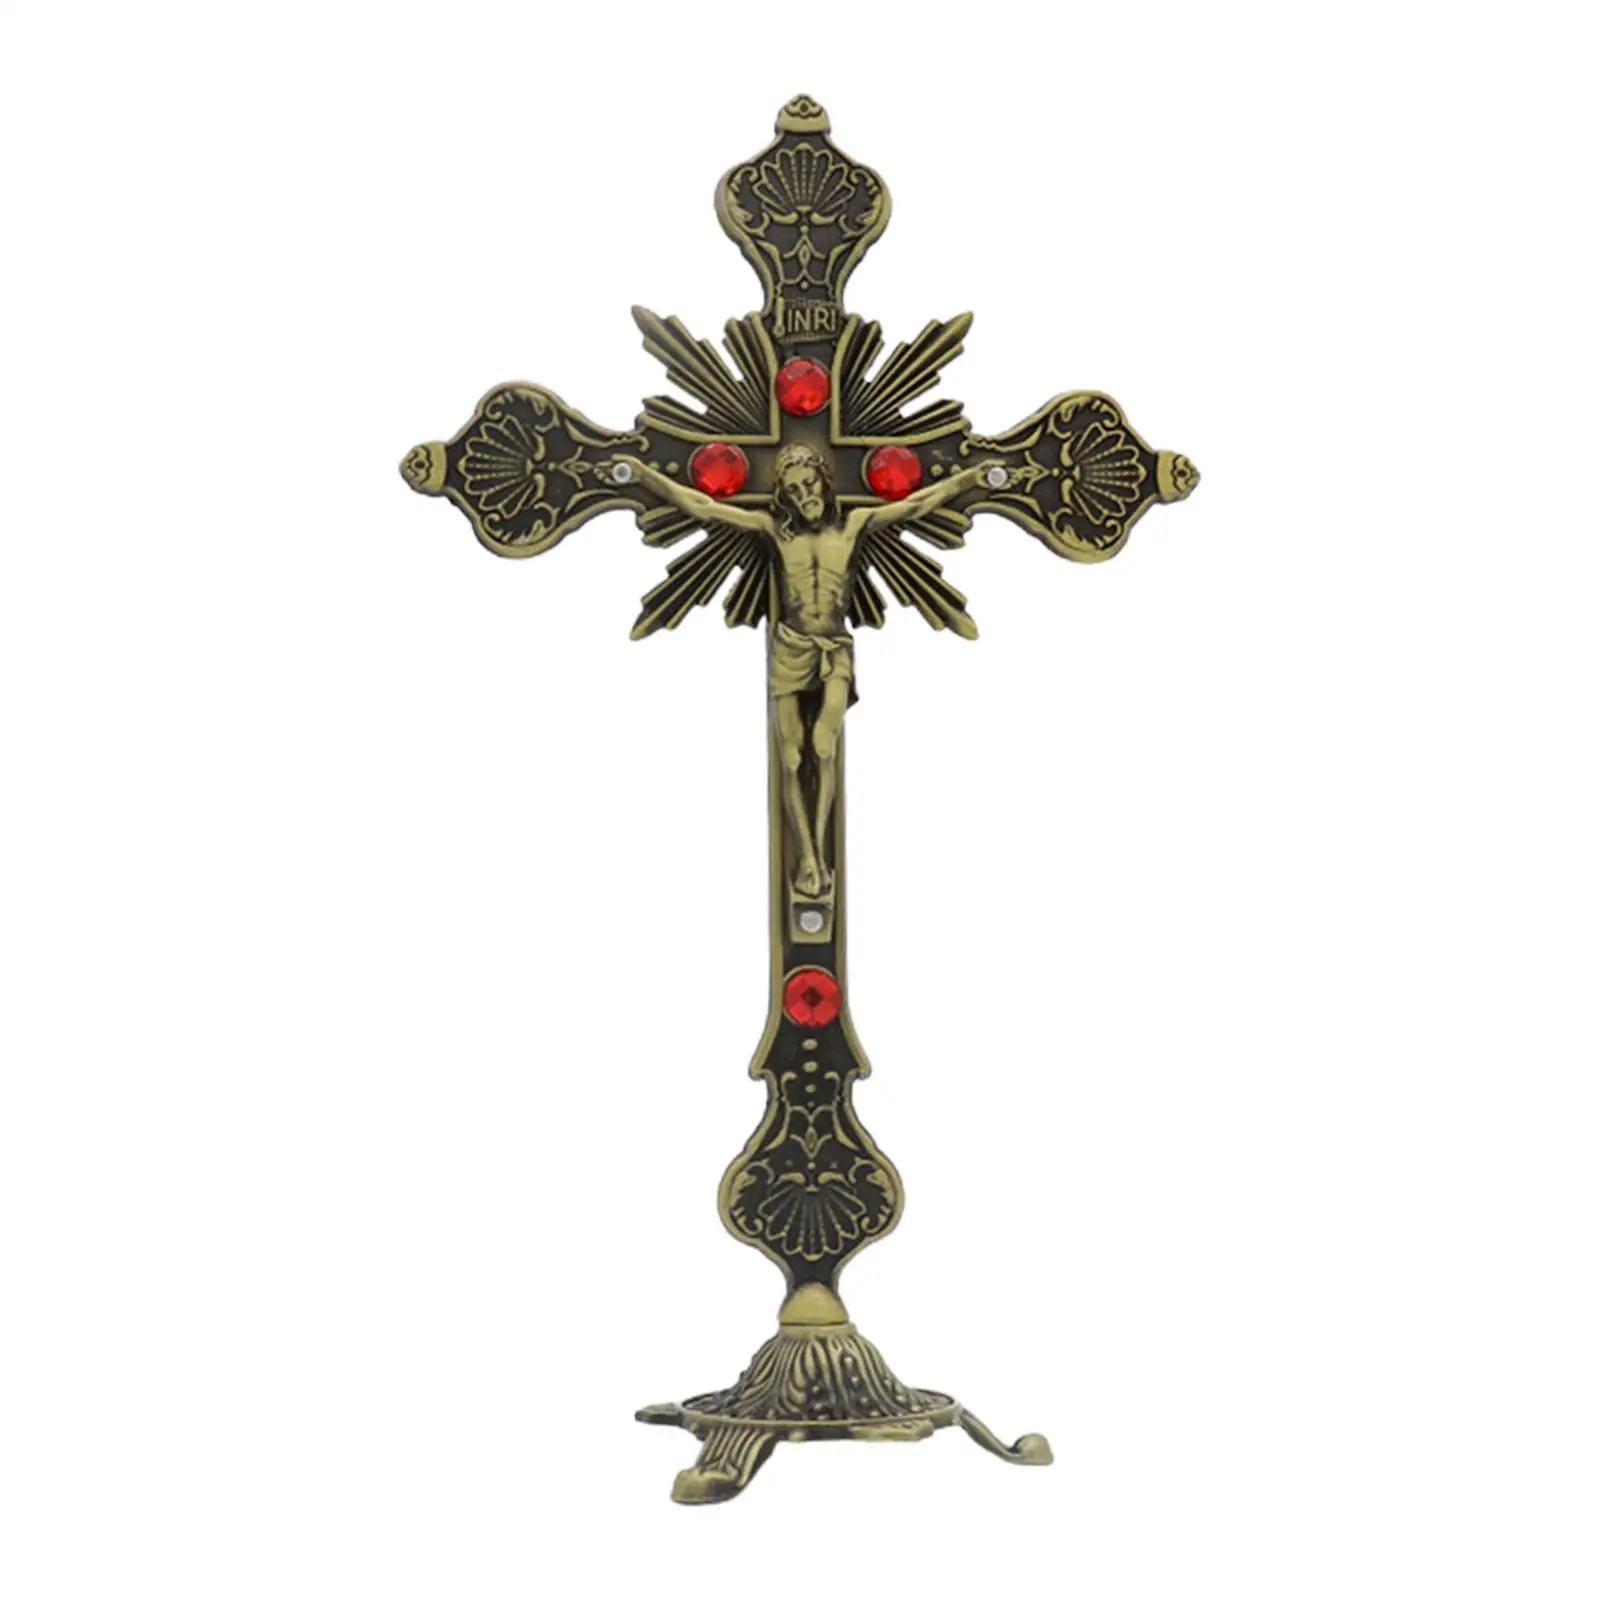 Hanging or Standing Crucifix Crucifix with Stand for Chapel Tabletop Home